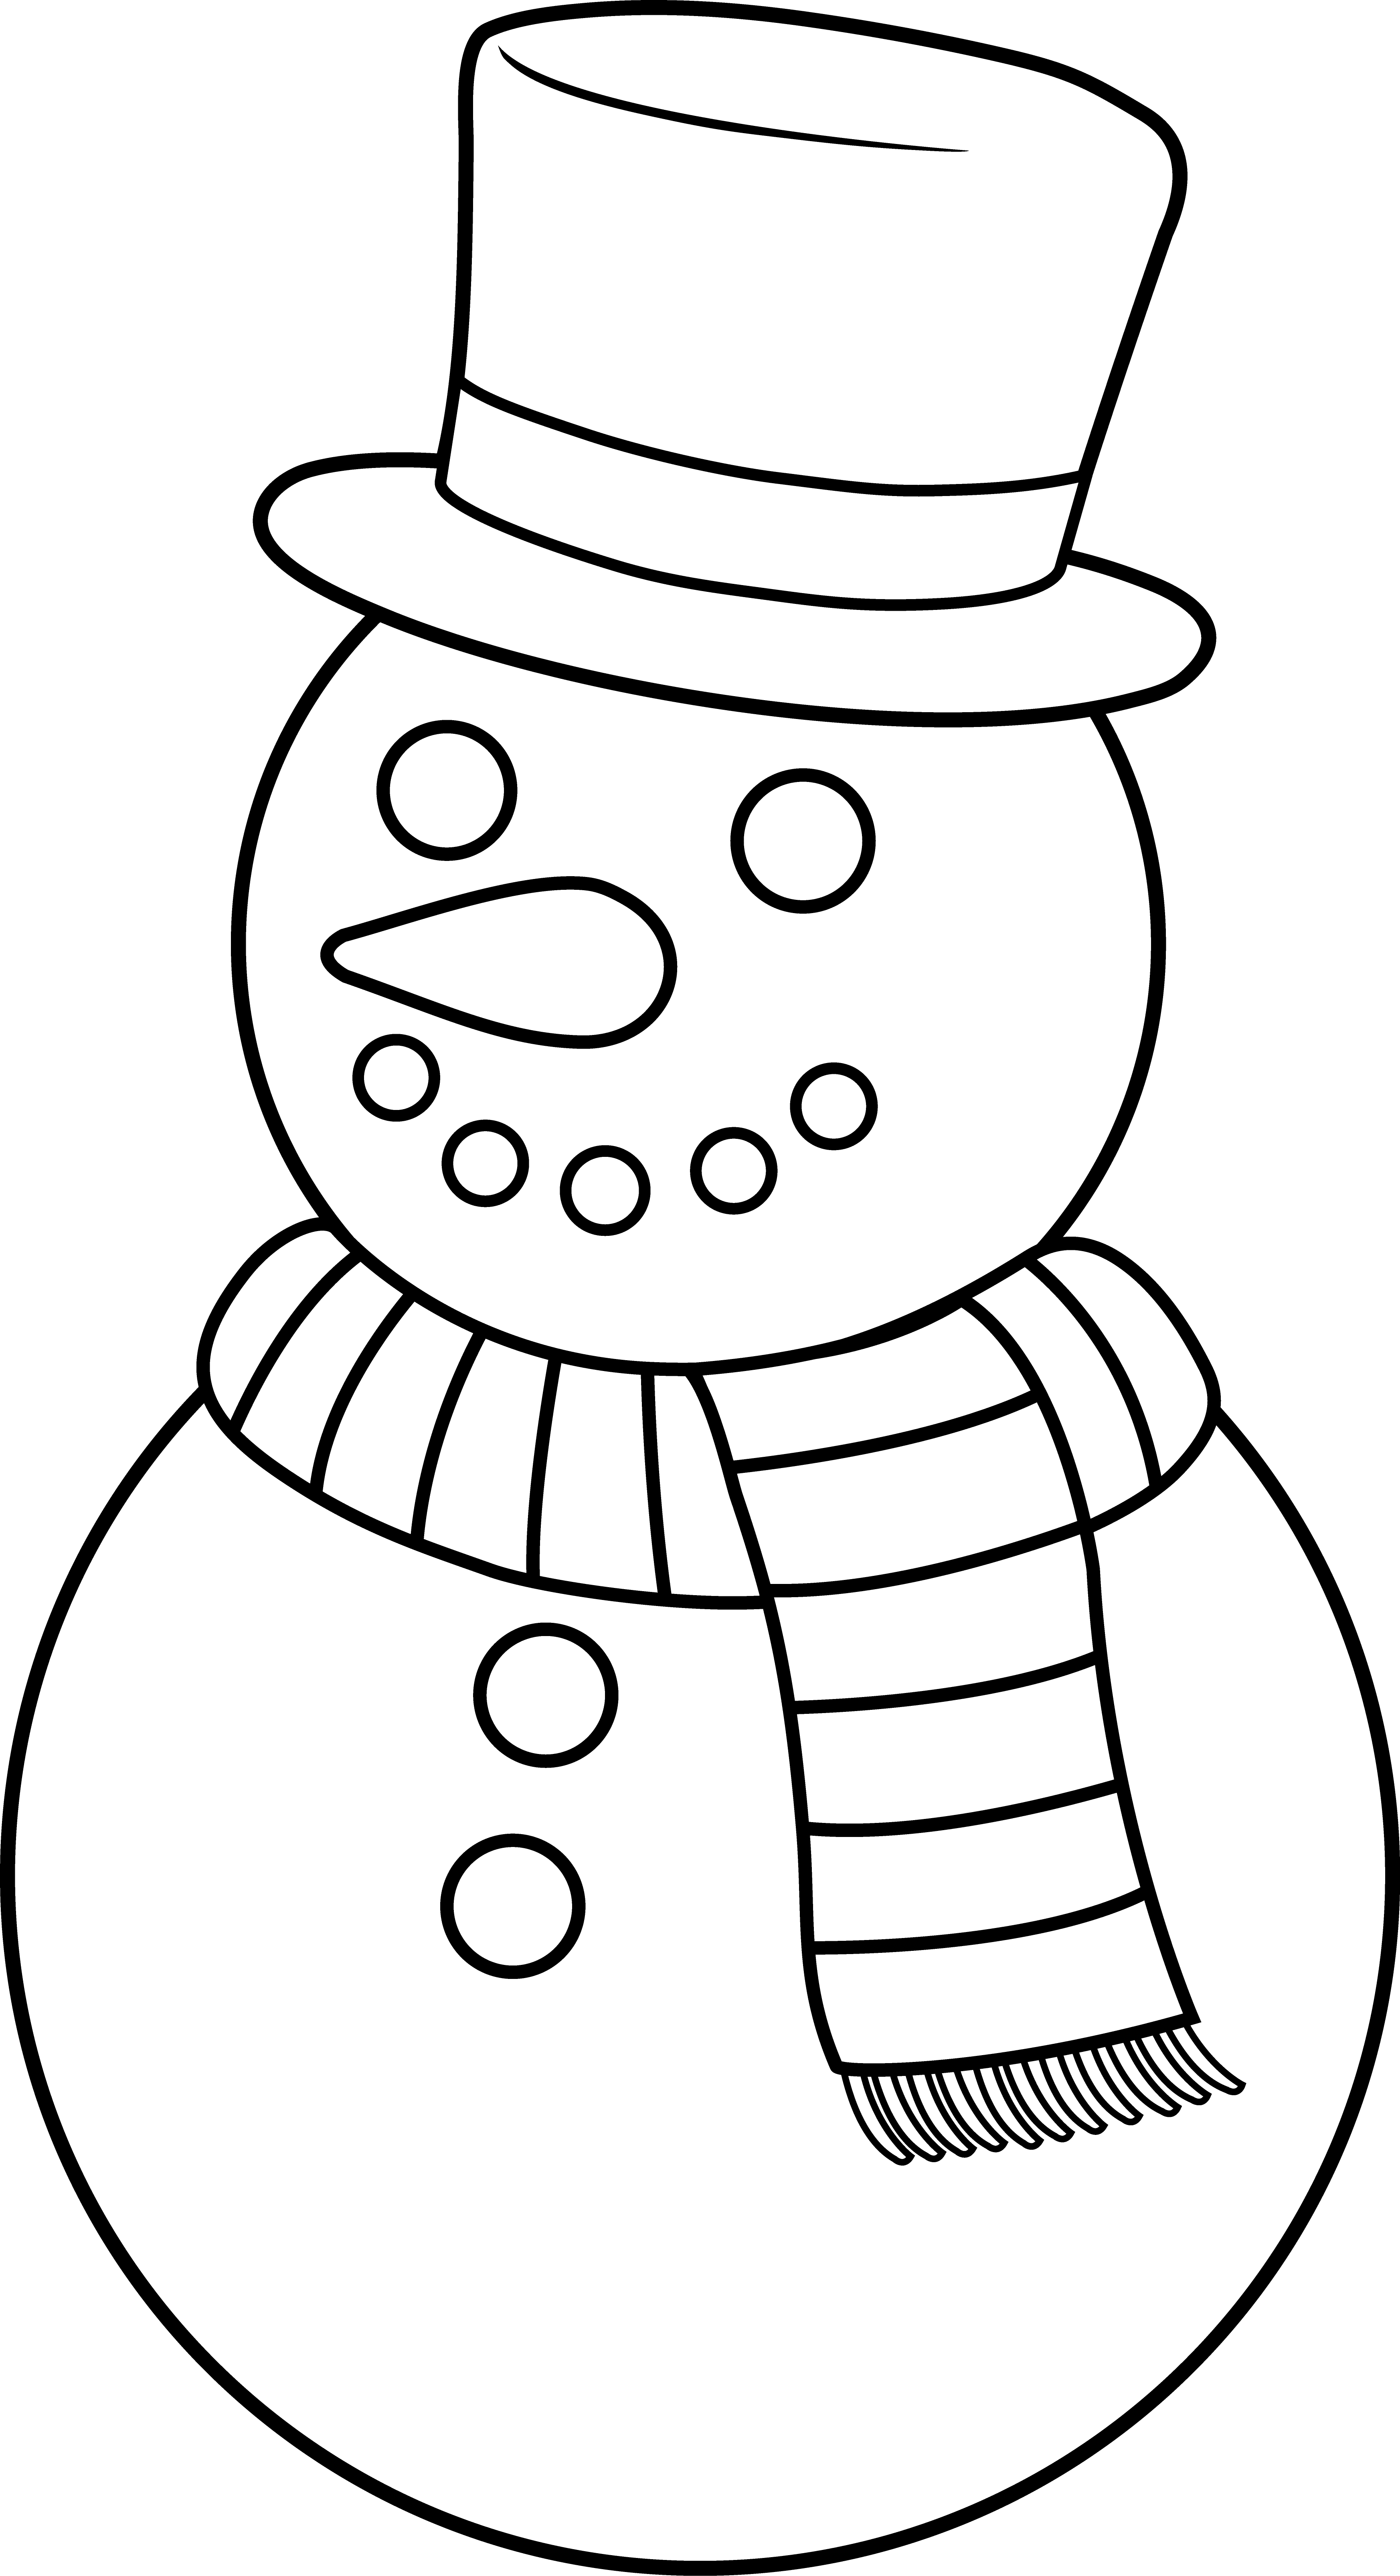 Christmas Line Drawing Cliparts.co